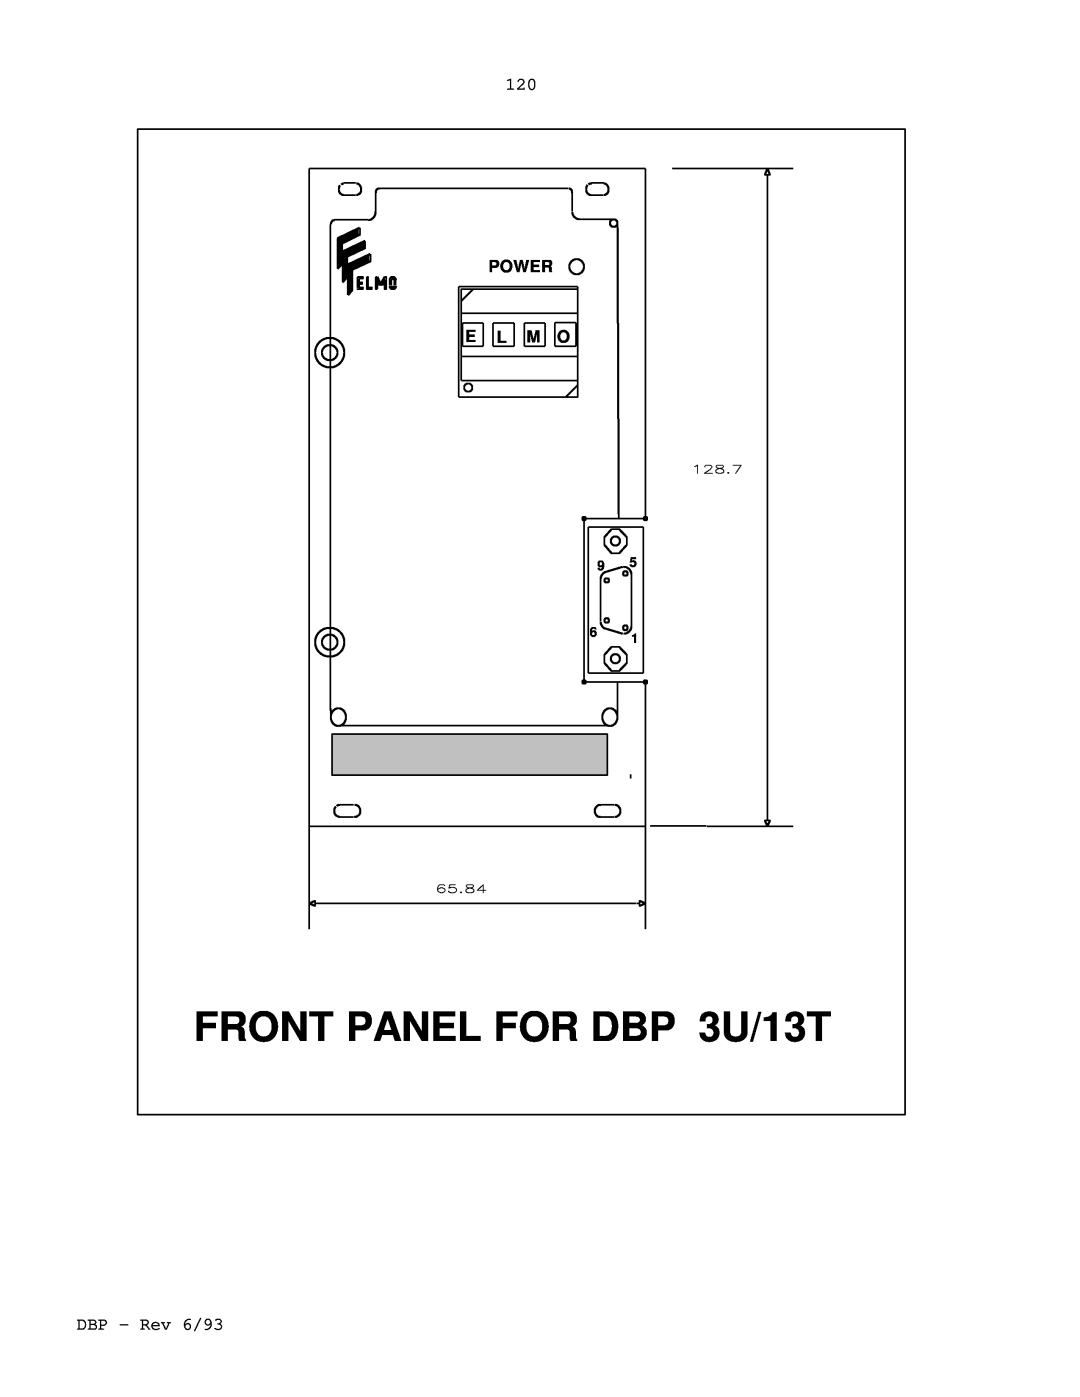 Elmo DBP SERIES manual FRONT PANEL FOR DBP 3U/13T, Power 